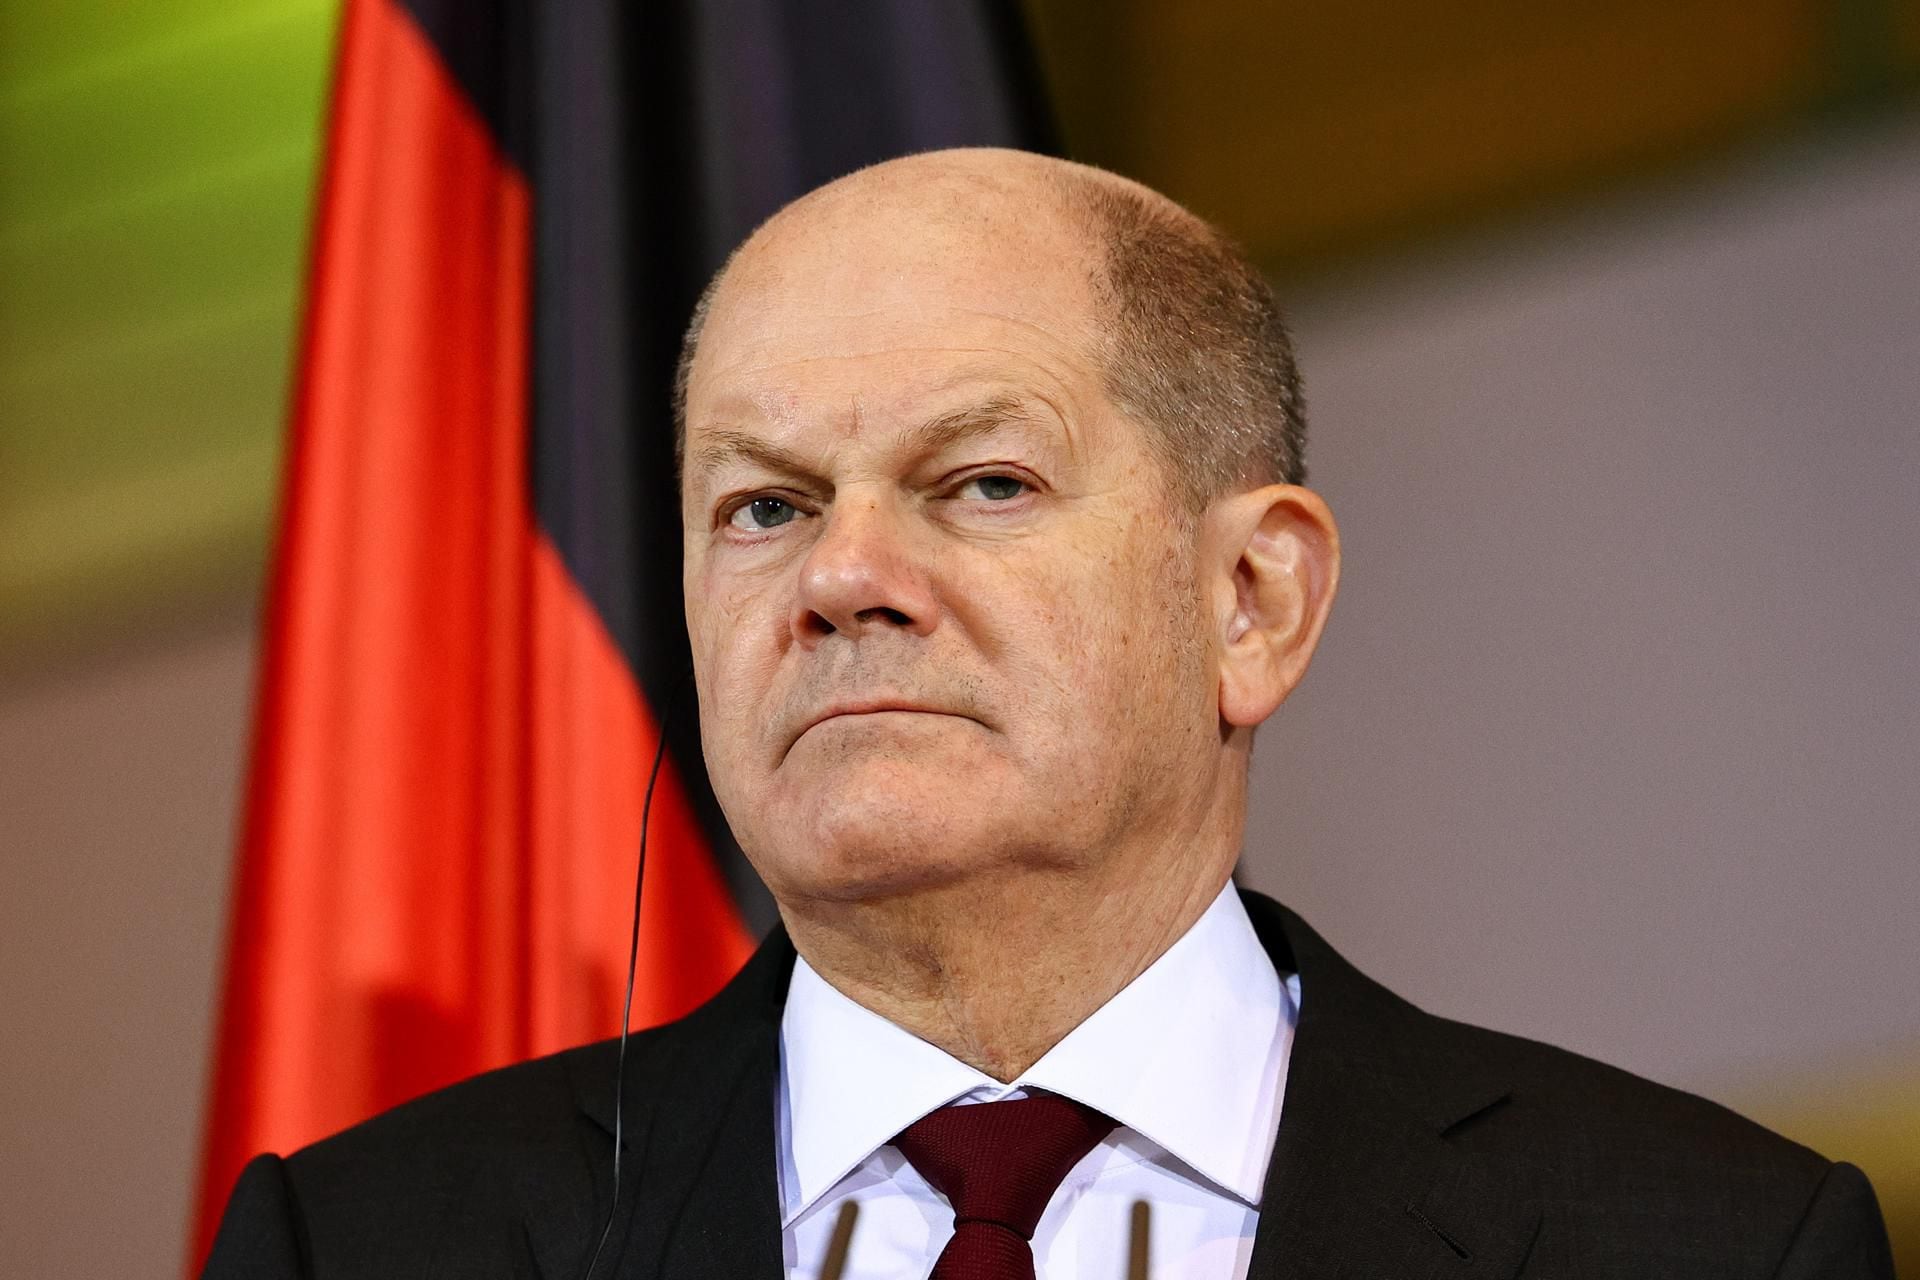 German Chancellor Olaf Scholz promised on Saturday to thoroughly investigate the military conversation intercepted by Moscow.